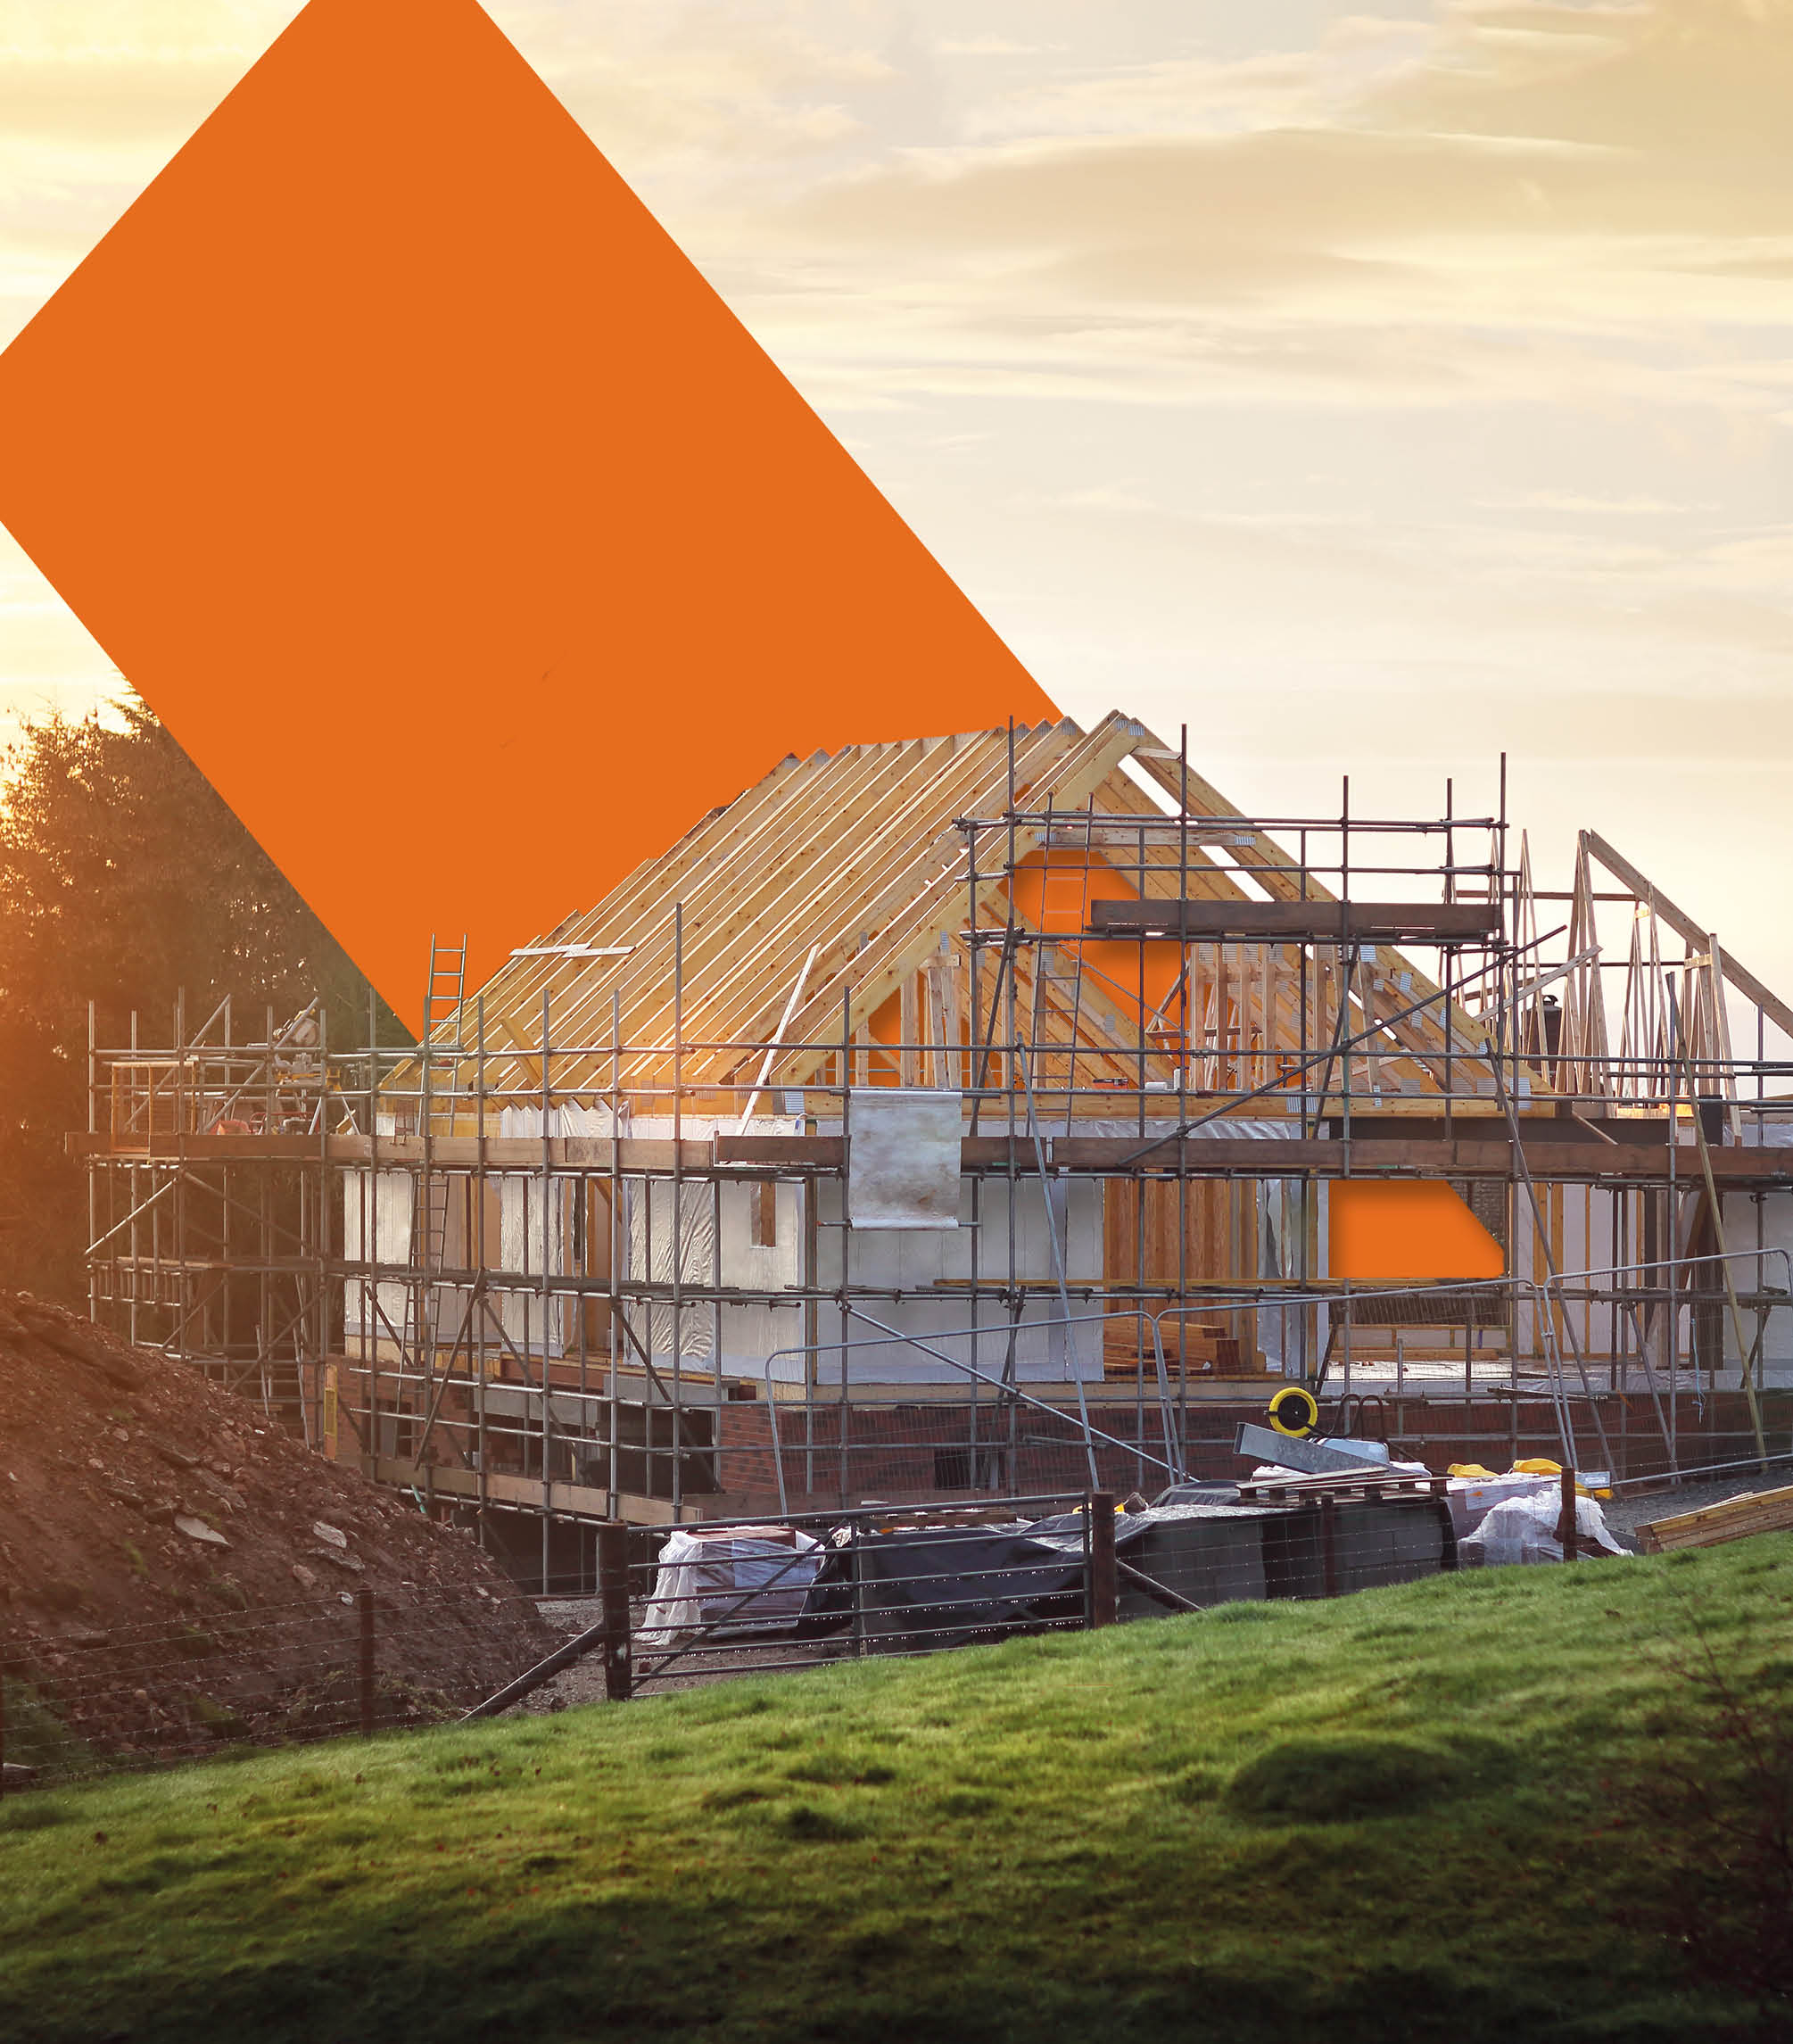 LABC brand image showing orange geometric shapes from the logo as part of a house construction site